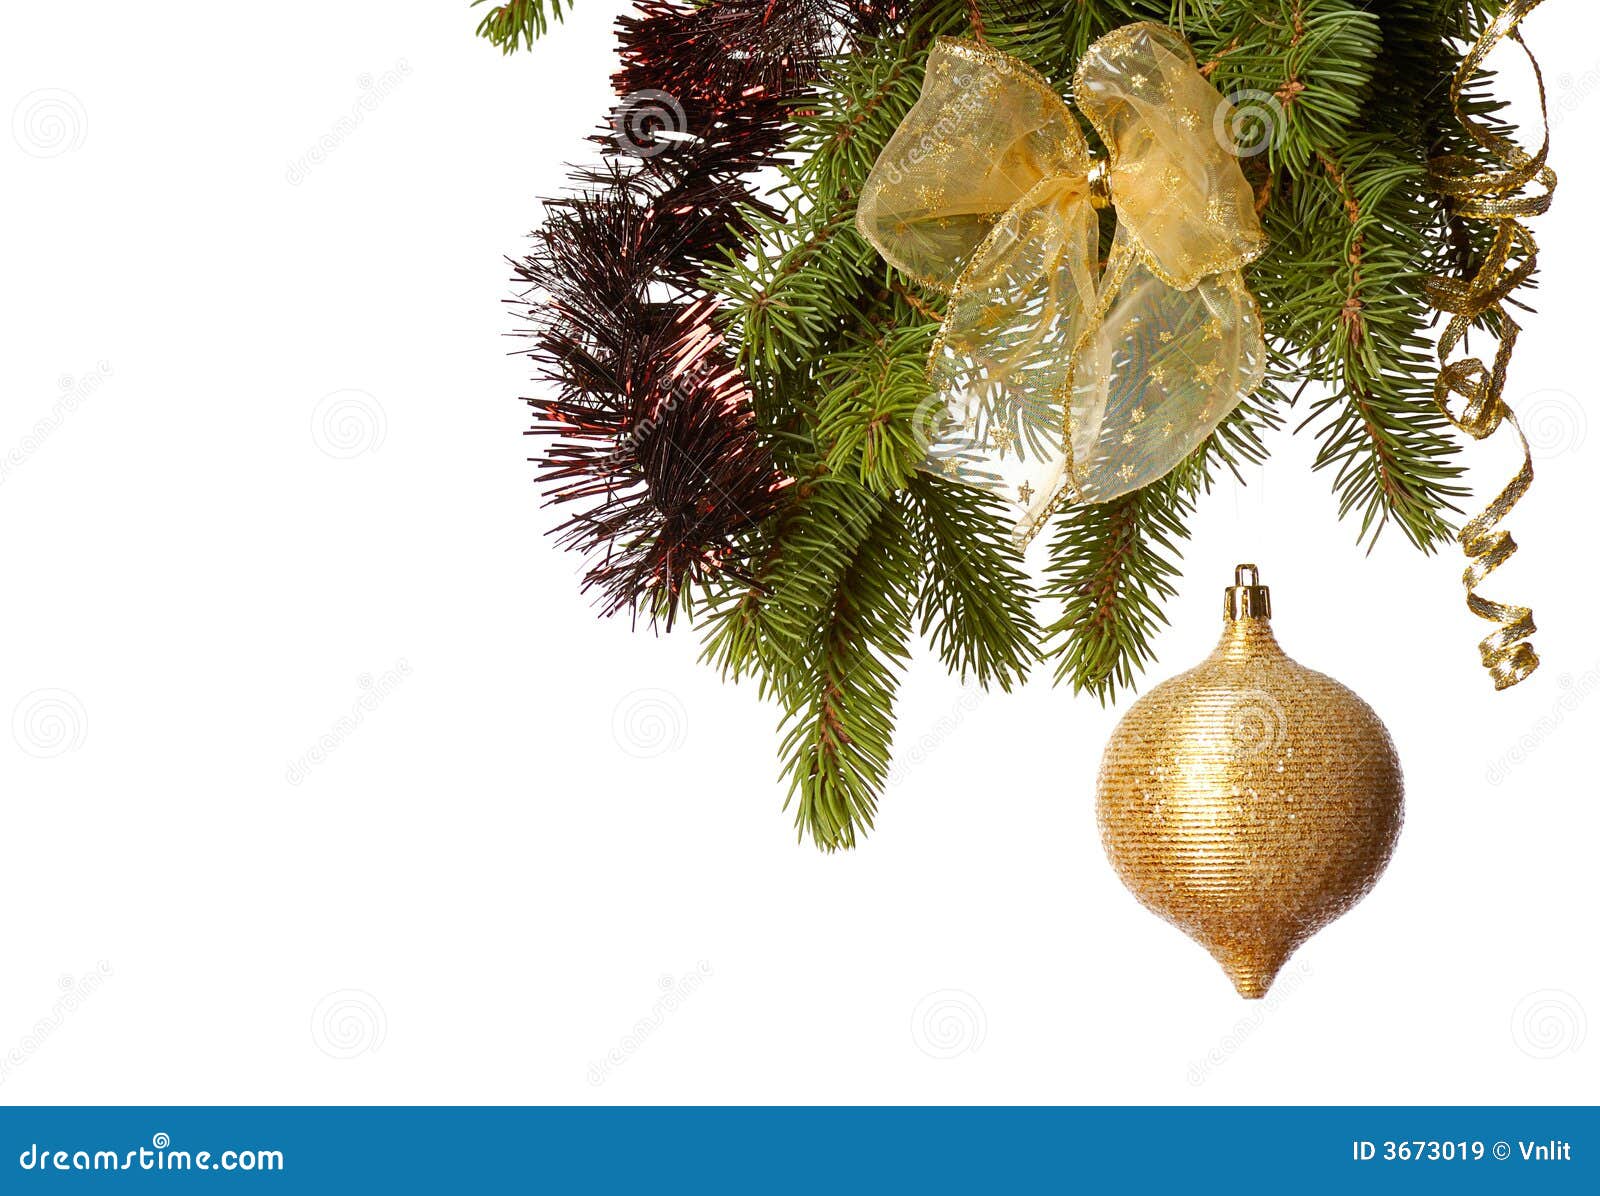 Gold Christmas decoration stock image. Image of branch  3673019